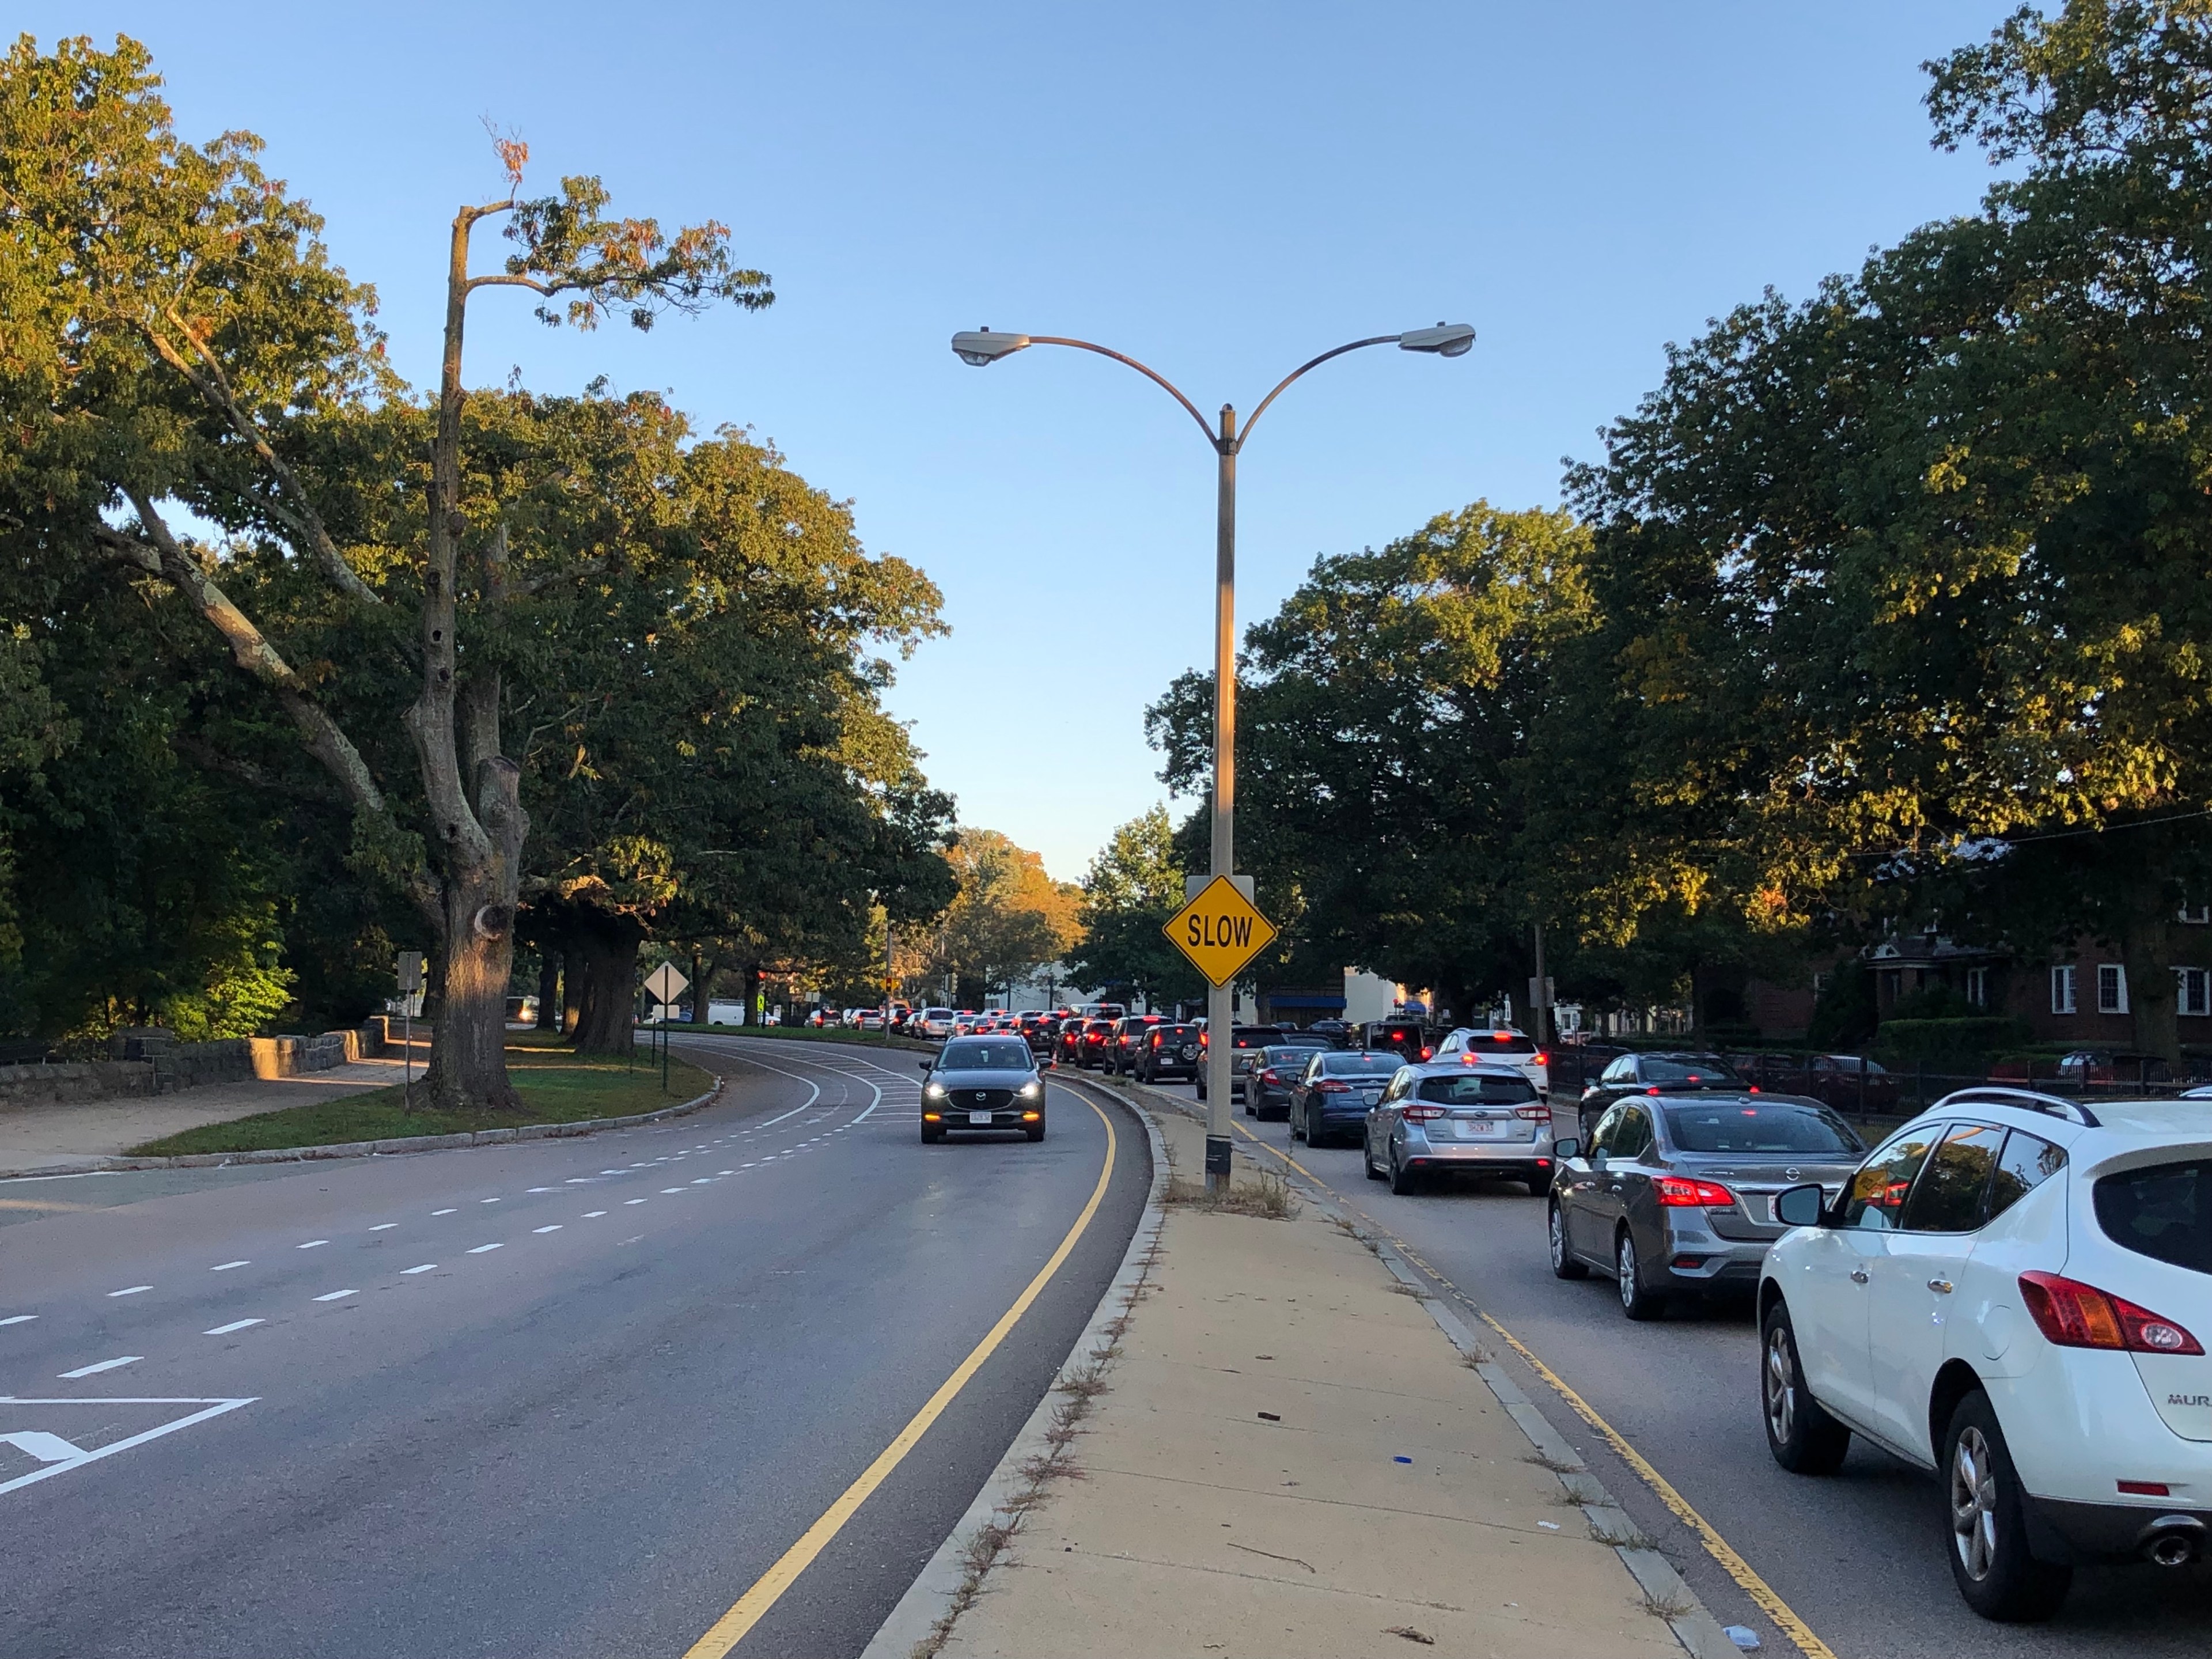 A long line of cars waits in two lanes of stopped traffic on the right, while on the left, a single car drives down a roadway next to a wide bike lane. A concrete median divides the two sides of the road, and on the edges of the photo are large, mature leafy trees.